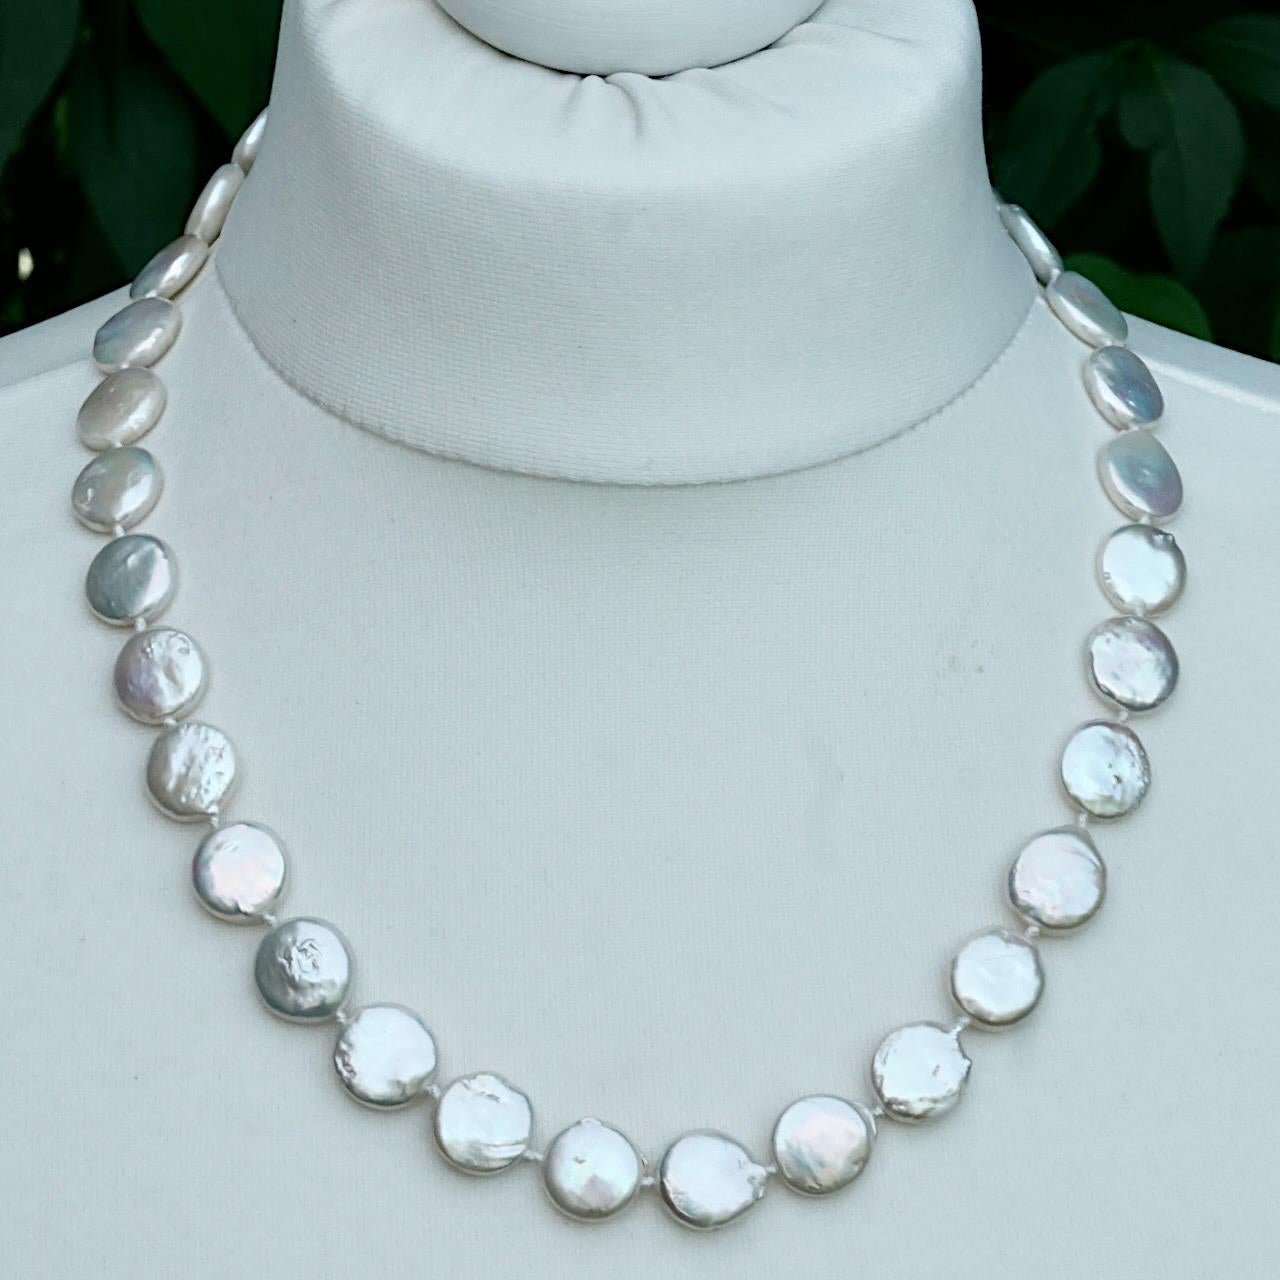 Freshwater Coin Pearl Knotted Necklace with an Iridescent Lustre In Good Condition For Sale In London, GB